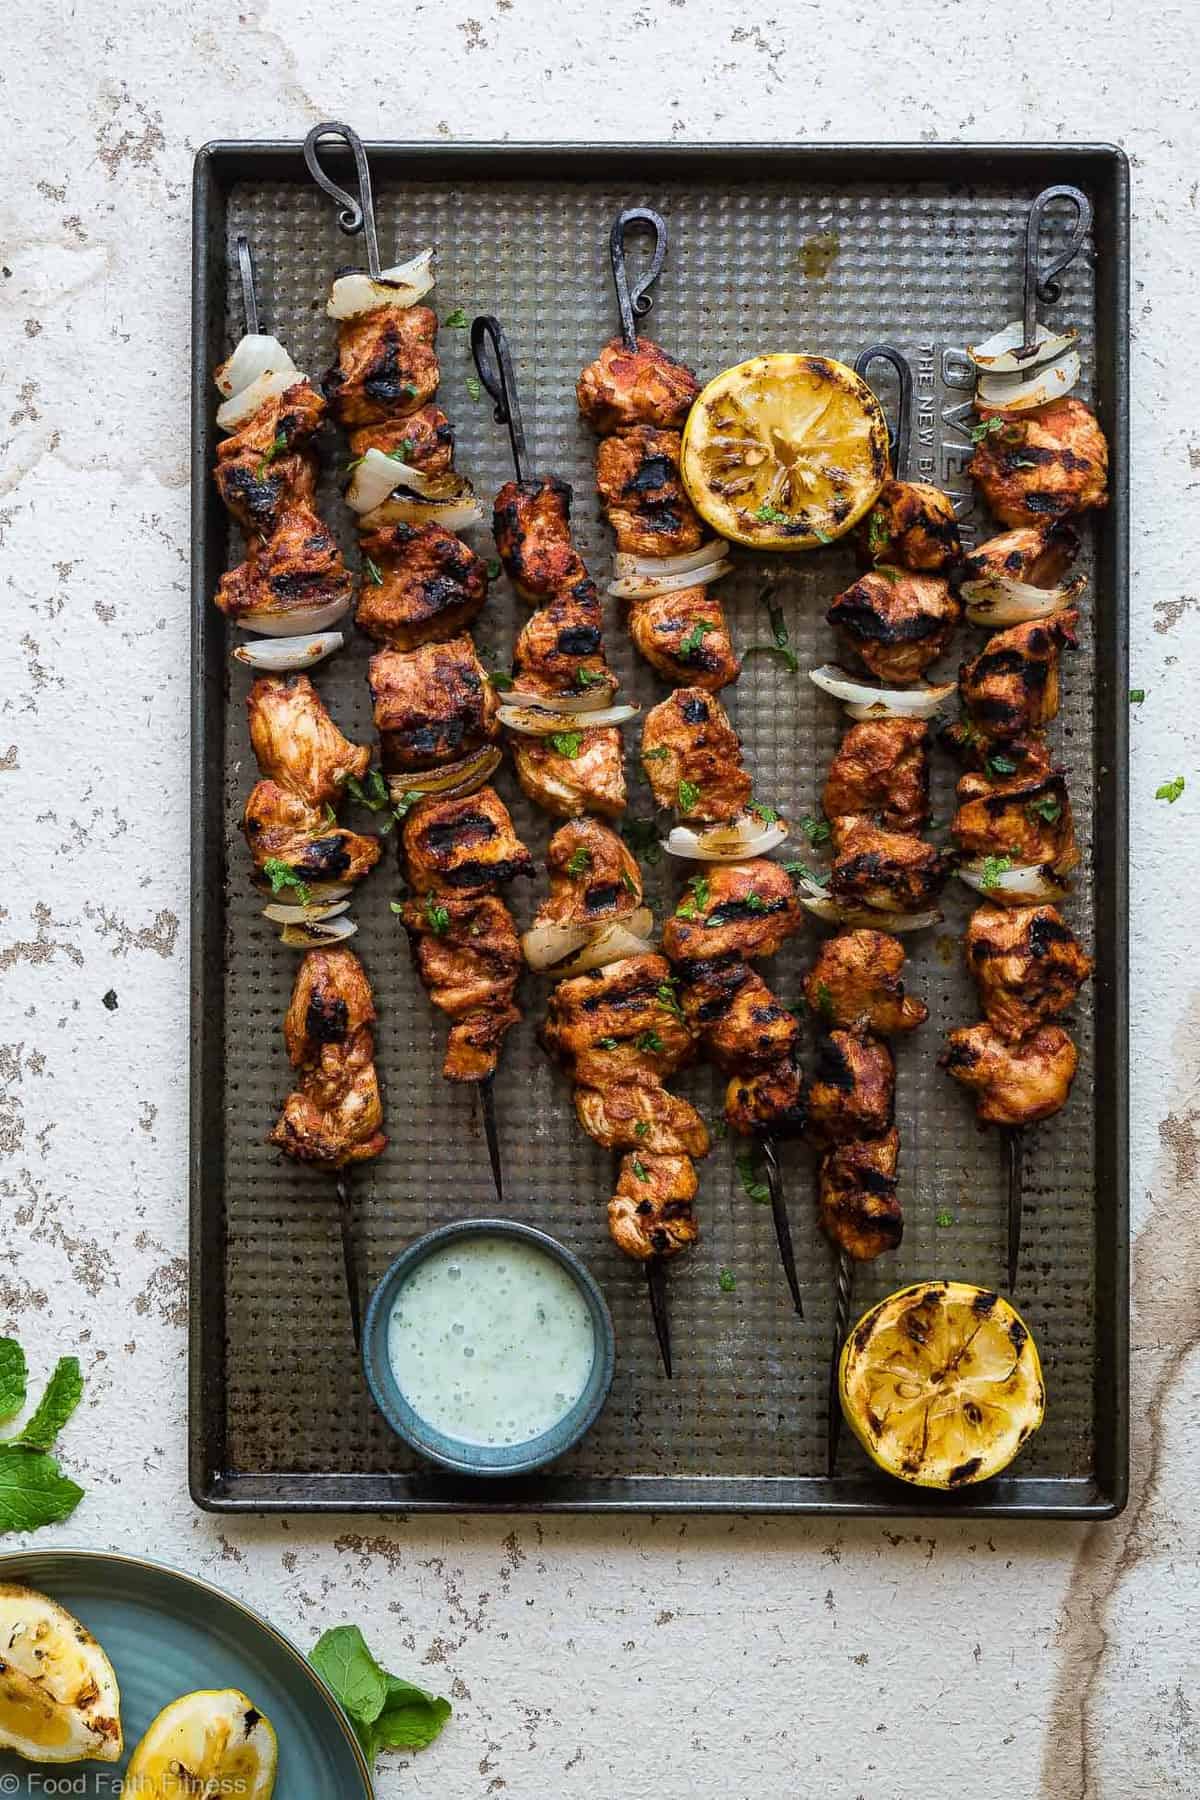 Tomato Grilled Moroccan Chicken Kebabs -Â These quick and easy, low carb Grilled Moroccan ChickenÂ skewers are complete with a healthy, high protein yogurt mint sauce! Gluten free, only 1 Weight Watchers Freestlye point and SO delicious! | #Foodfaithfitness | #Lowcarb #WeightWatchers #Glutenfree #Healthy #Grilling